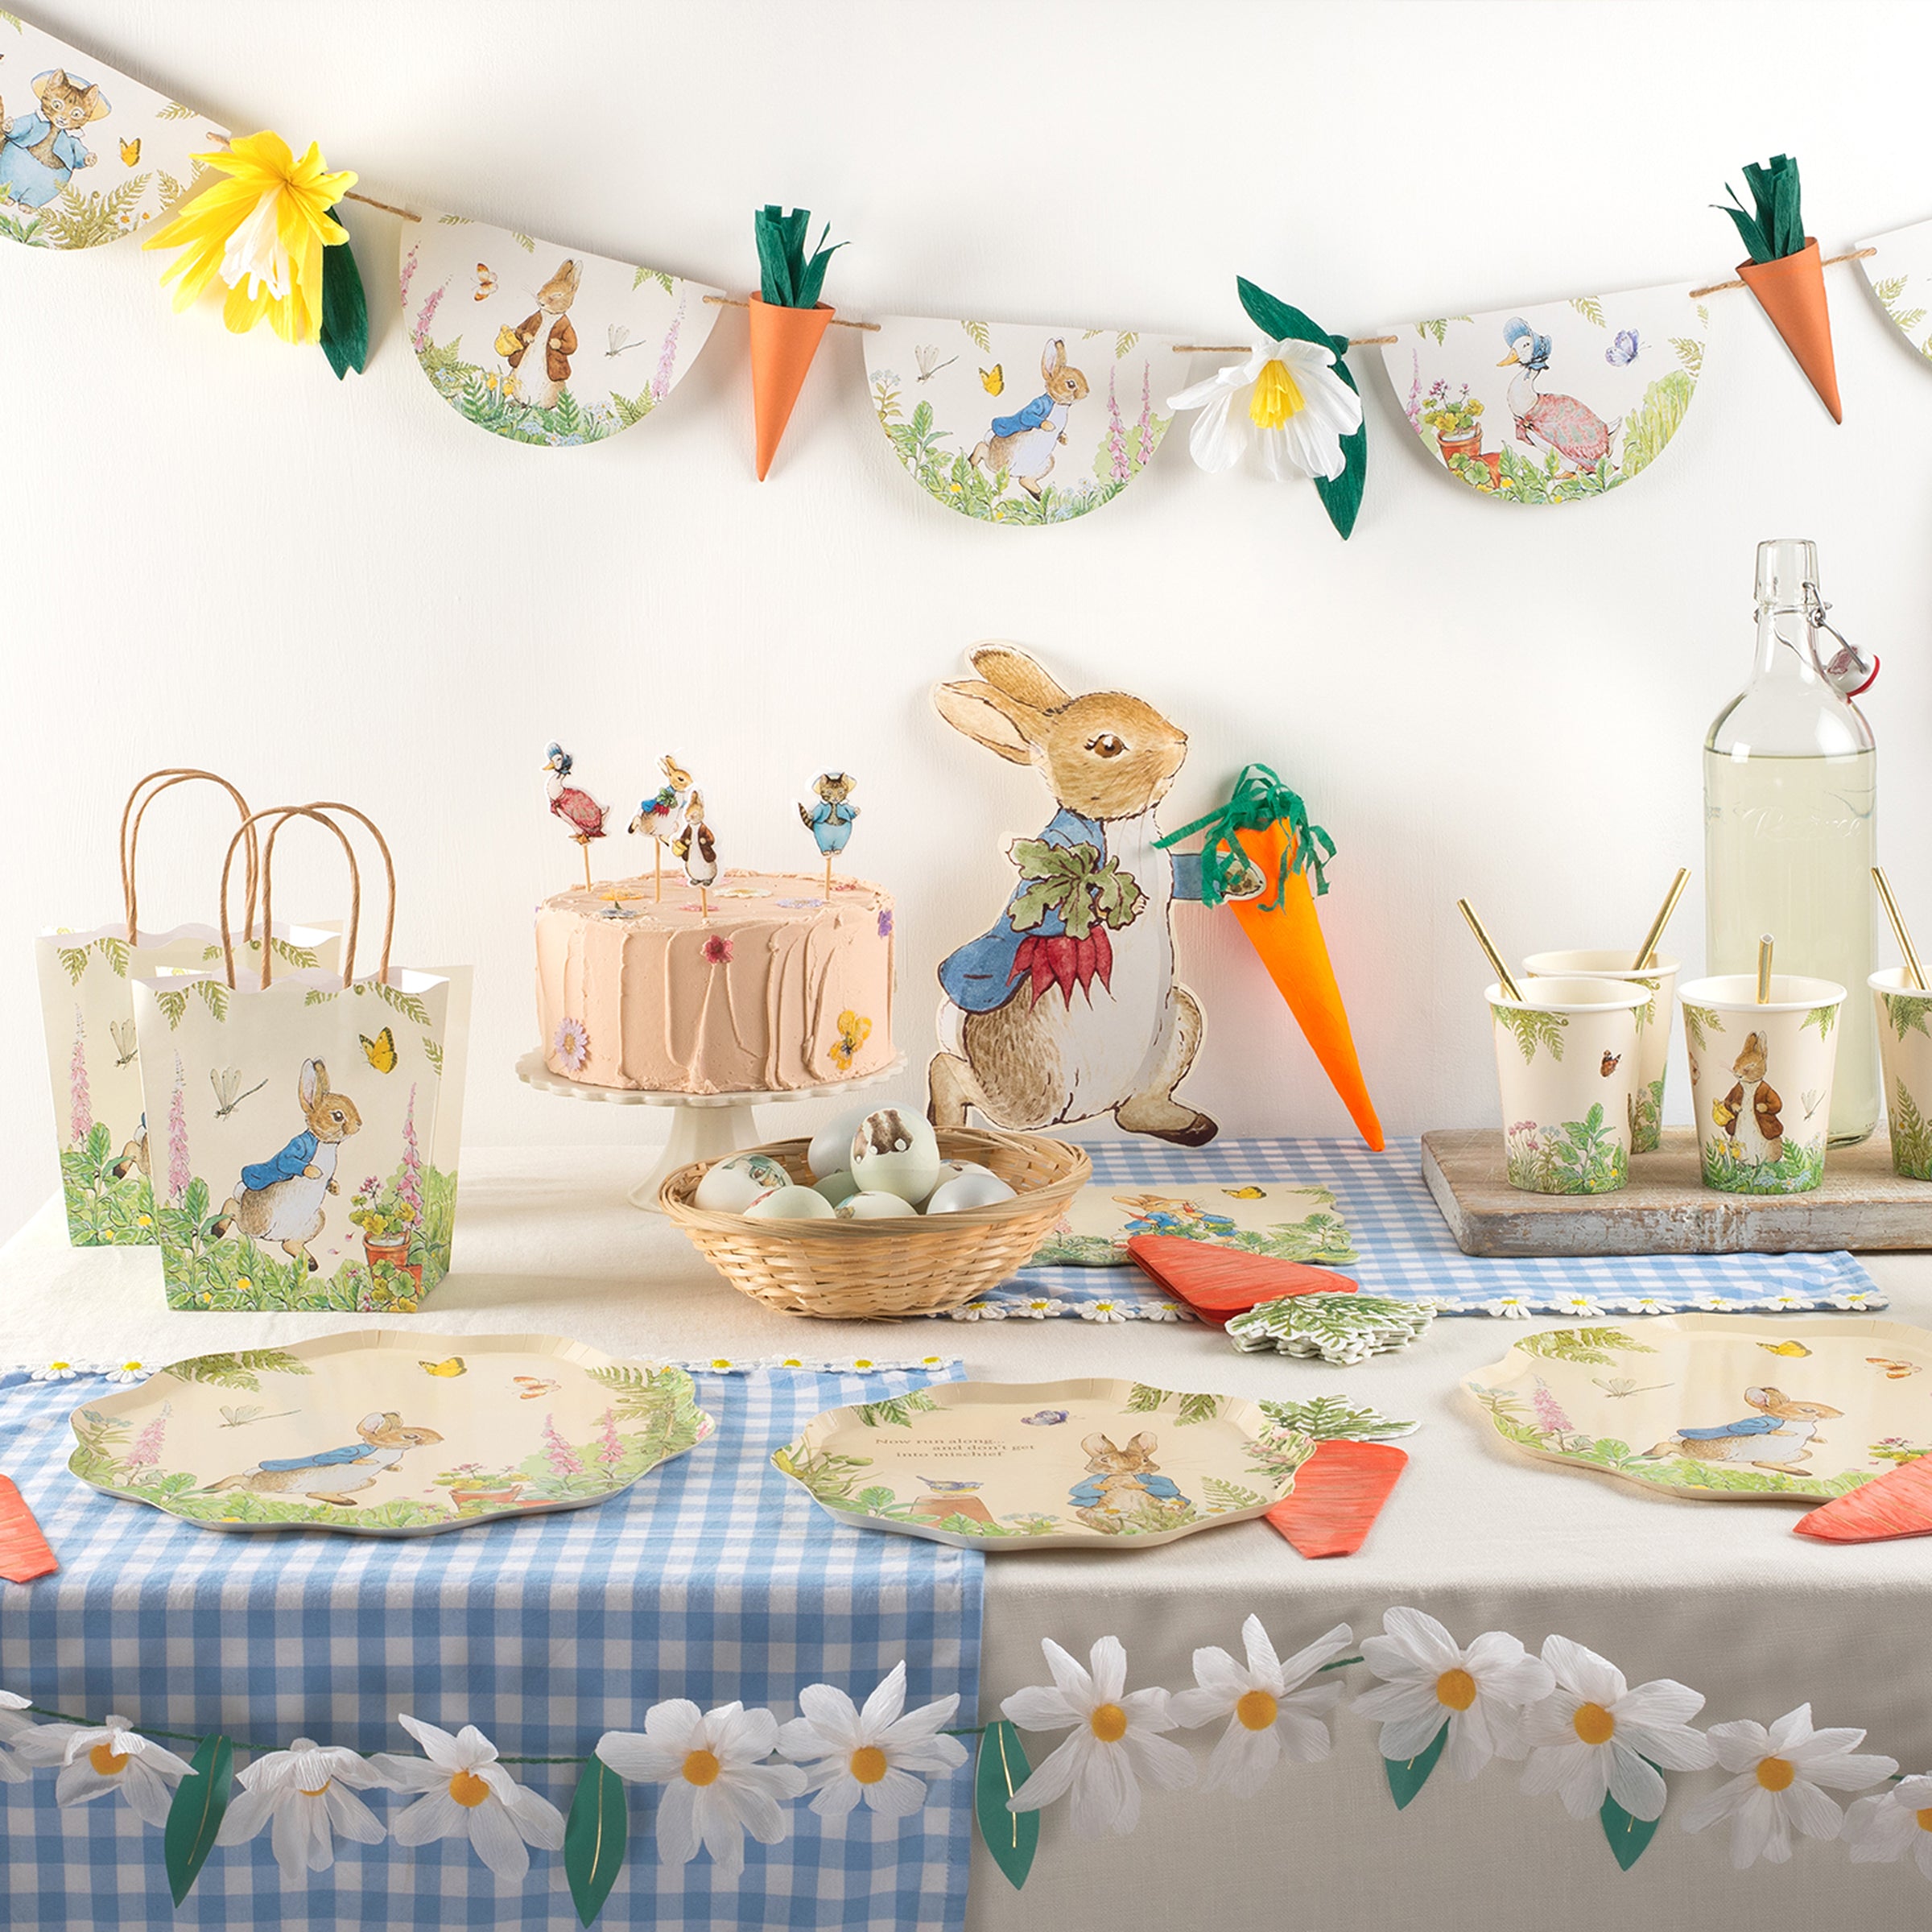 Our special party bags for kids feature Peter Rabbit, scalloped borders and paper handles.